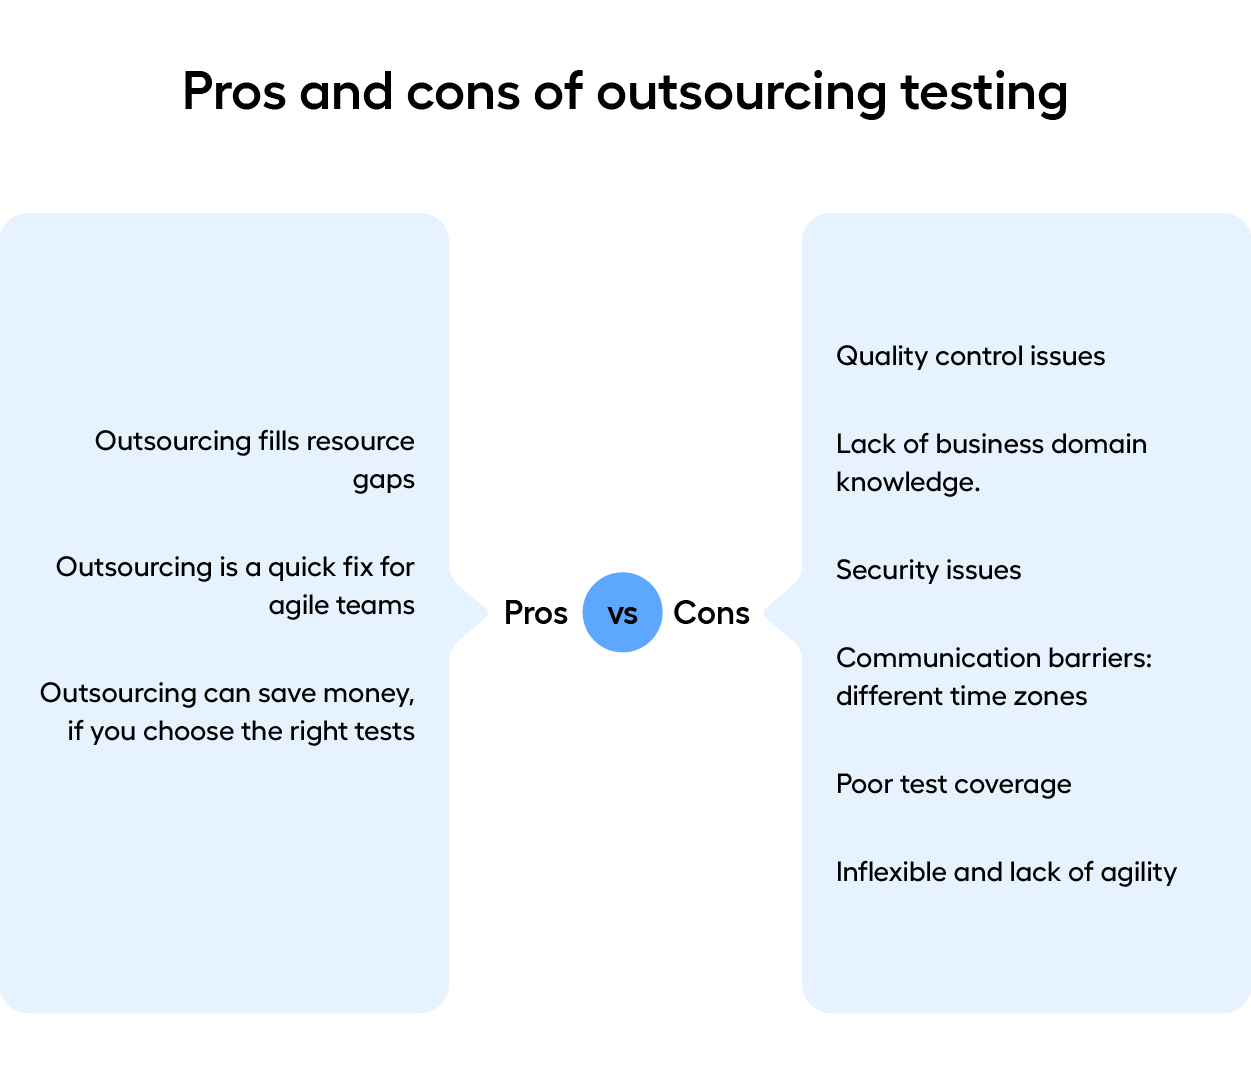 Outsourcing testing pros and cons